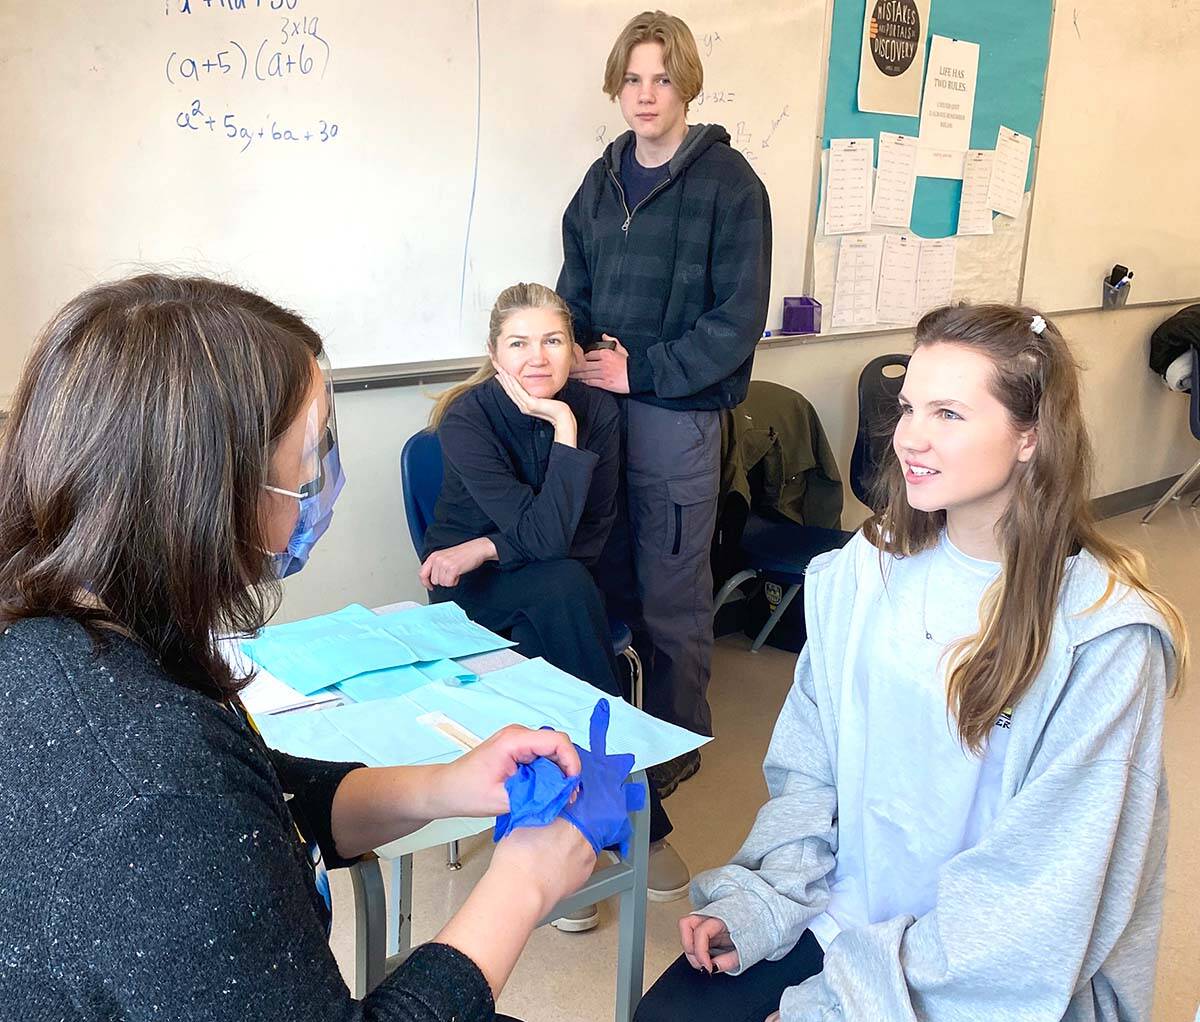 Dental hygene assistant Maruie Giella, left, of Interior Health prepares to examine Vlada Varnytska teeth. Watch in the background are her mother Vitalina and brother Ustym. There was a special oral health clinic for Ukrianian youth and their families. (Penticton Herald/LJI)